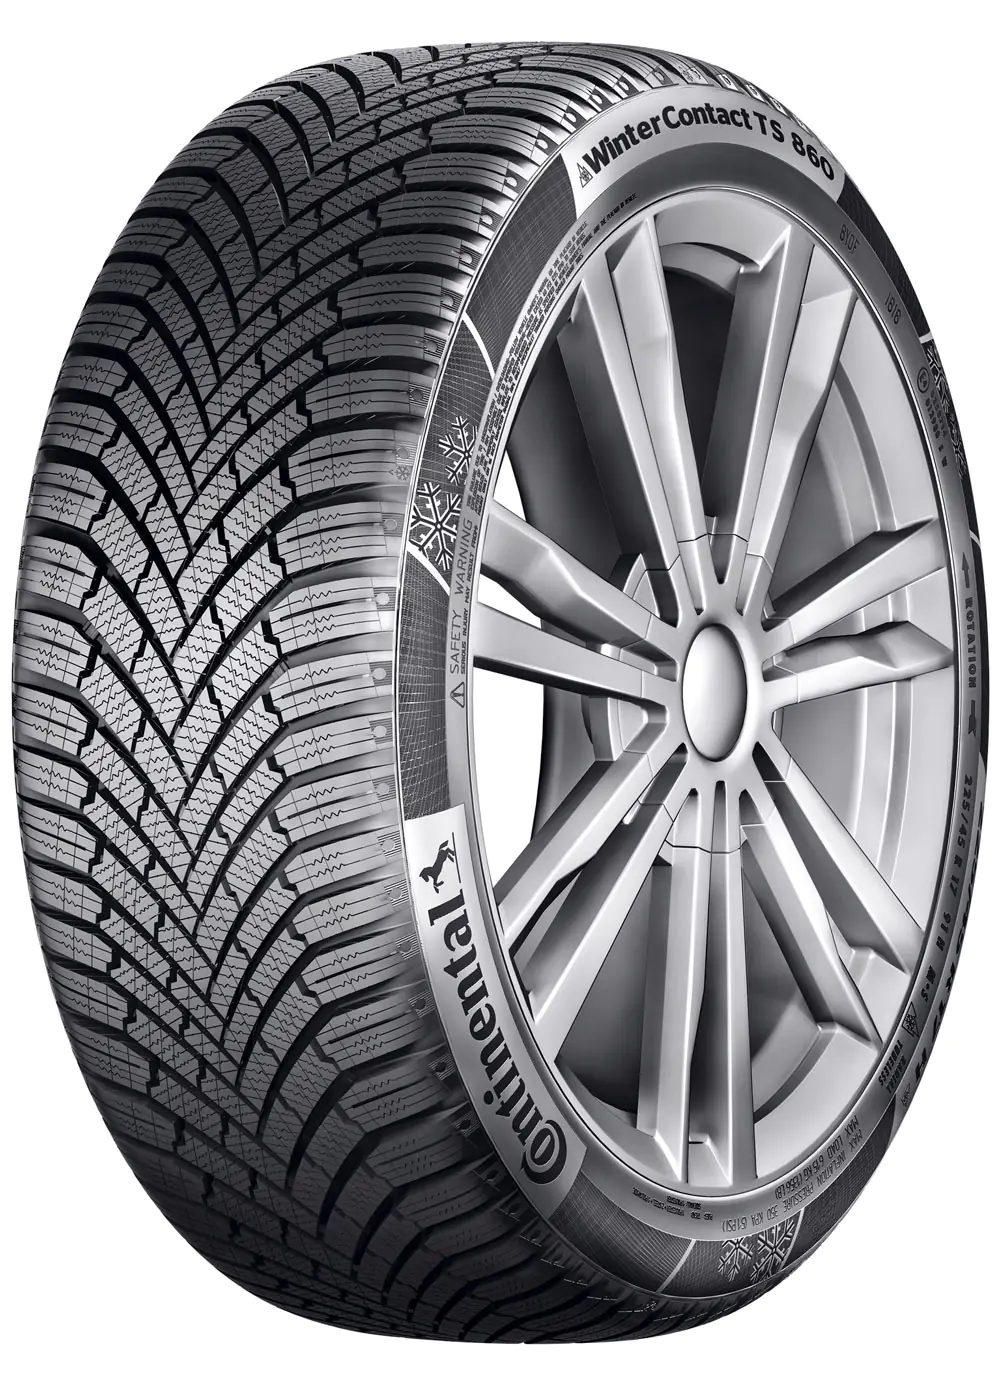 Gomme Autovettura Continental 175/65 R17 87H WinterContact TS 870 M+S Invernale